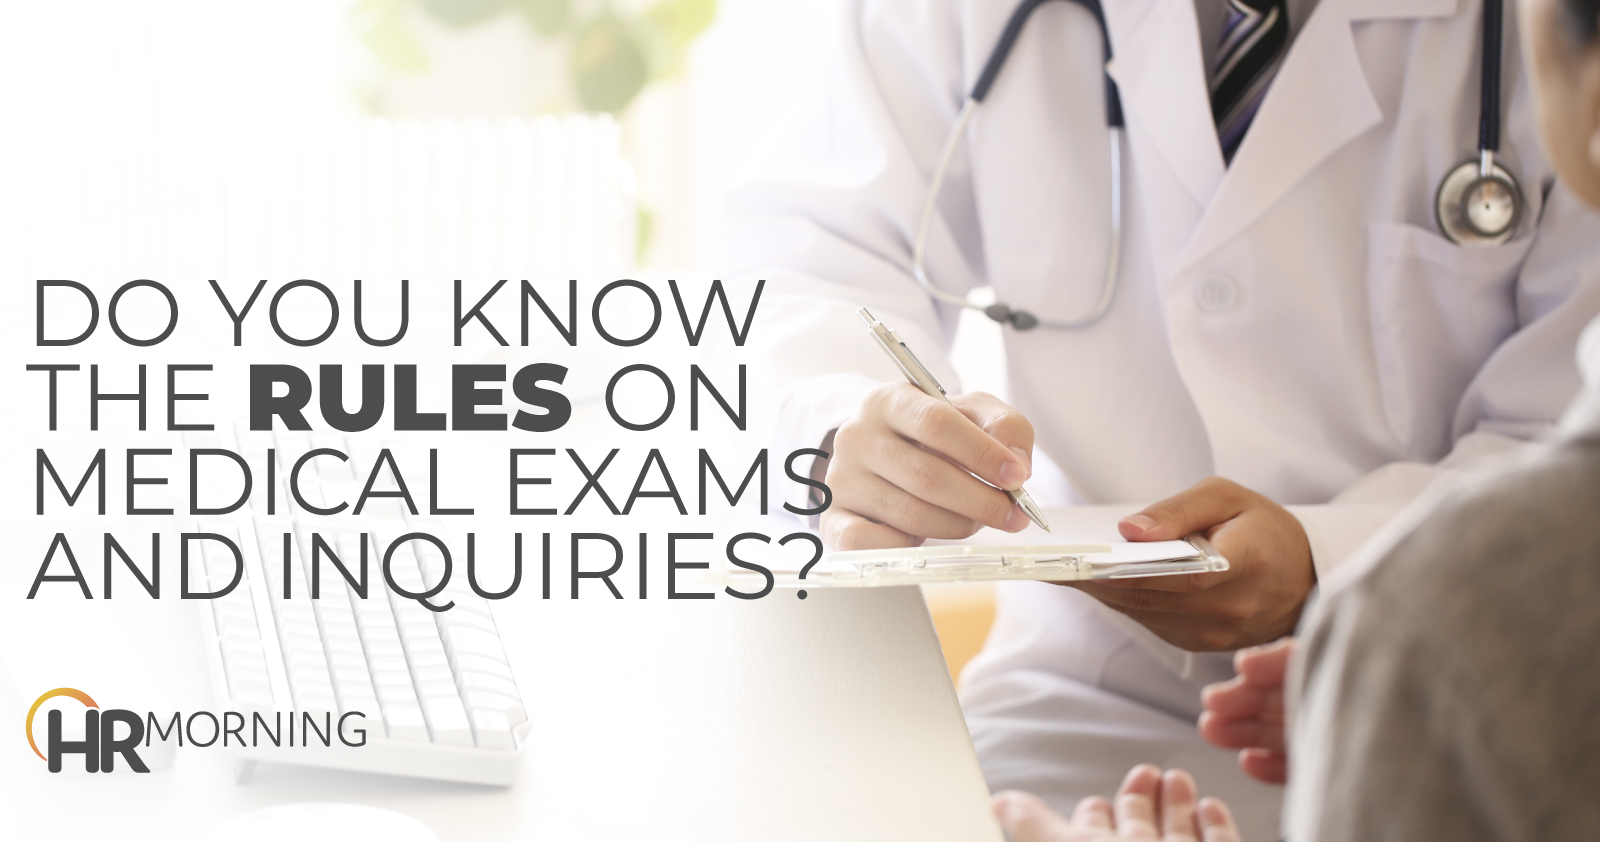 do you know the rules on medical exams and inquiries